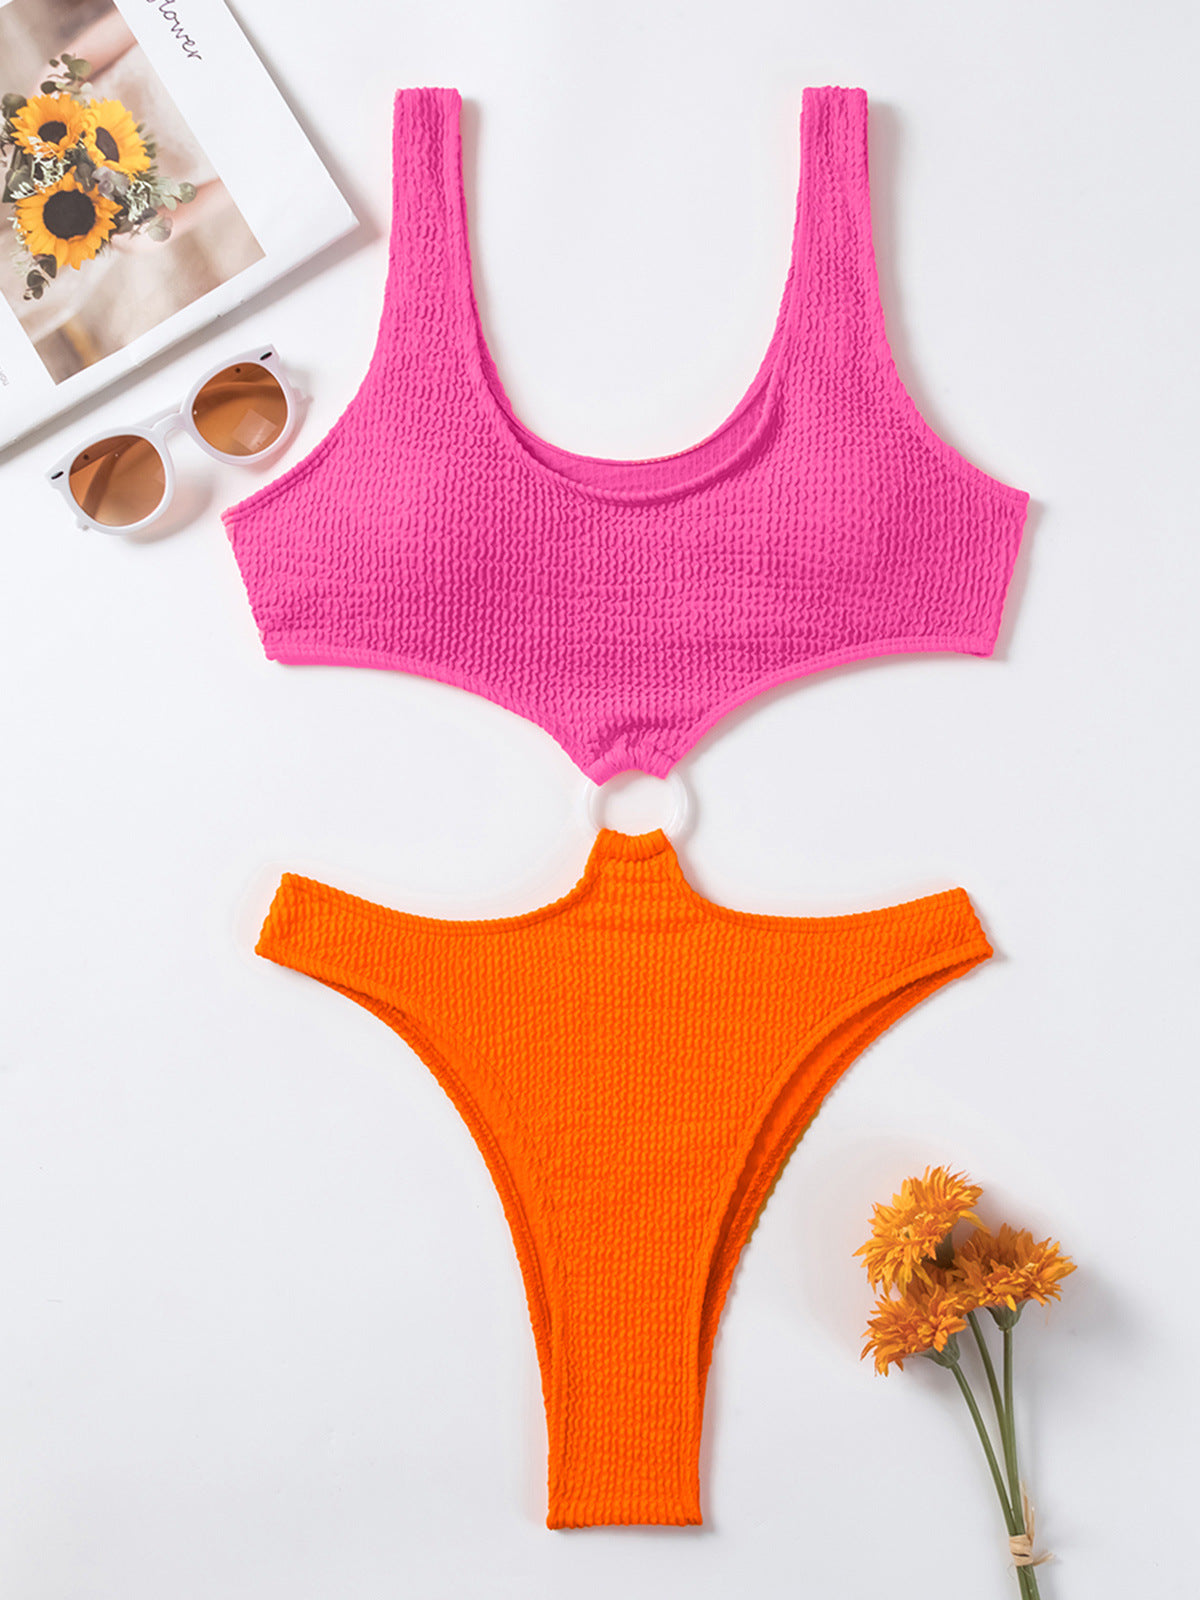 Women In One Piece Tight Fashion Swimsuit